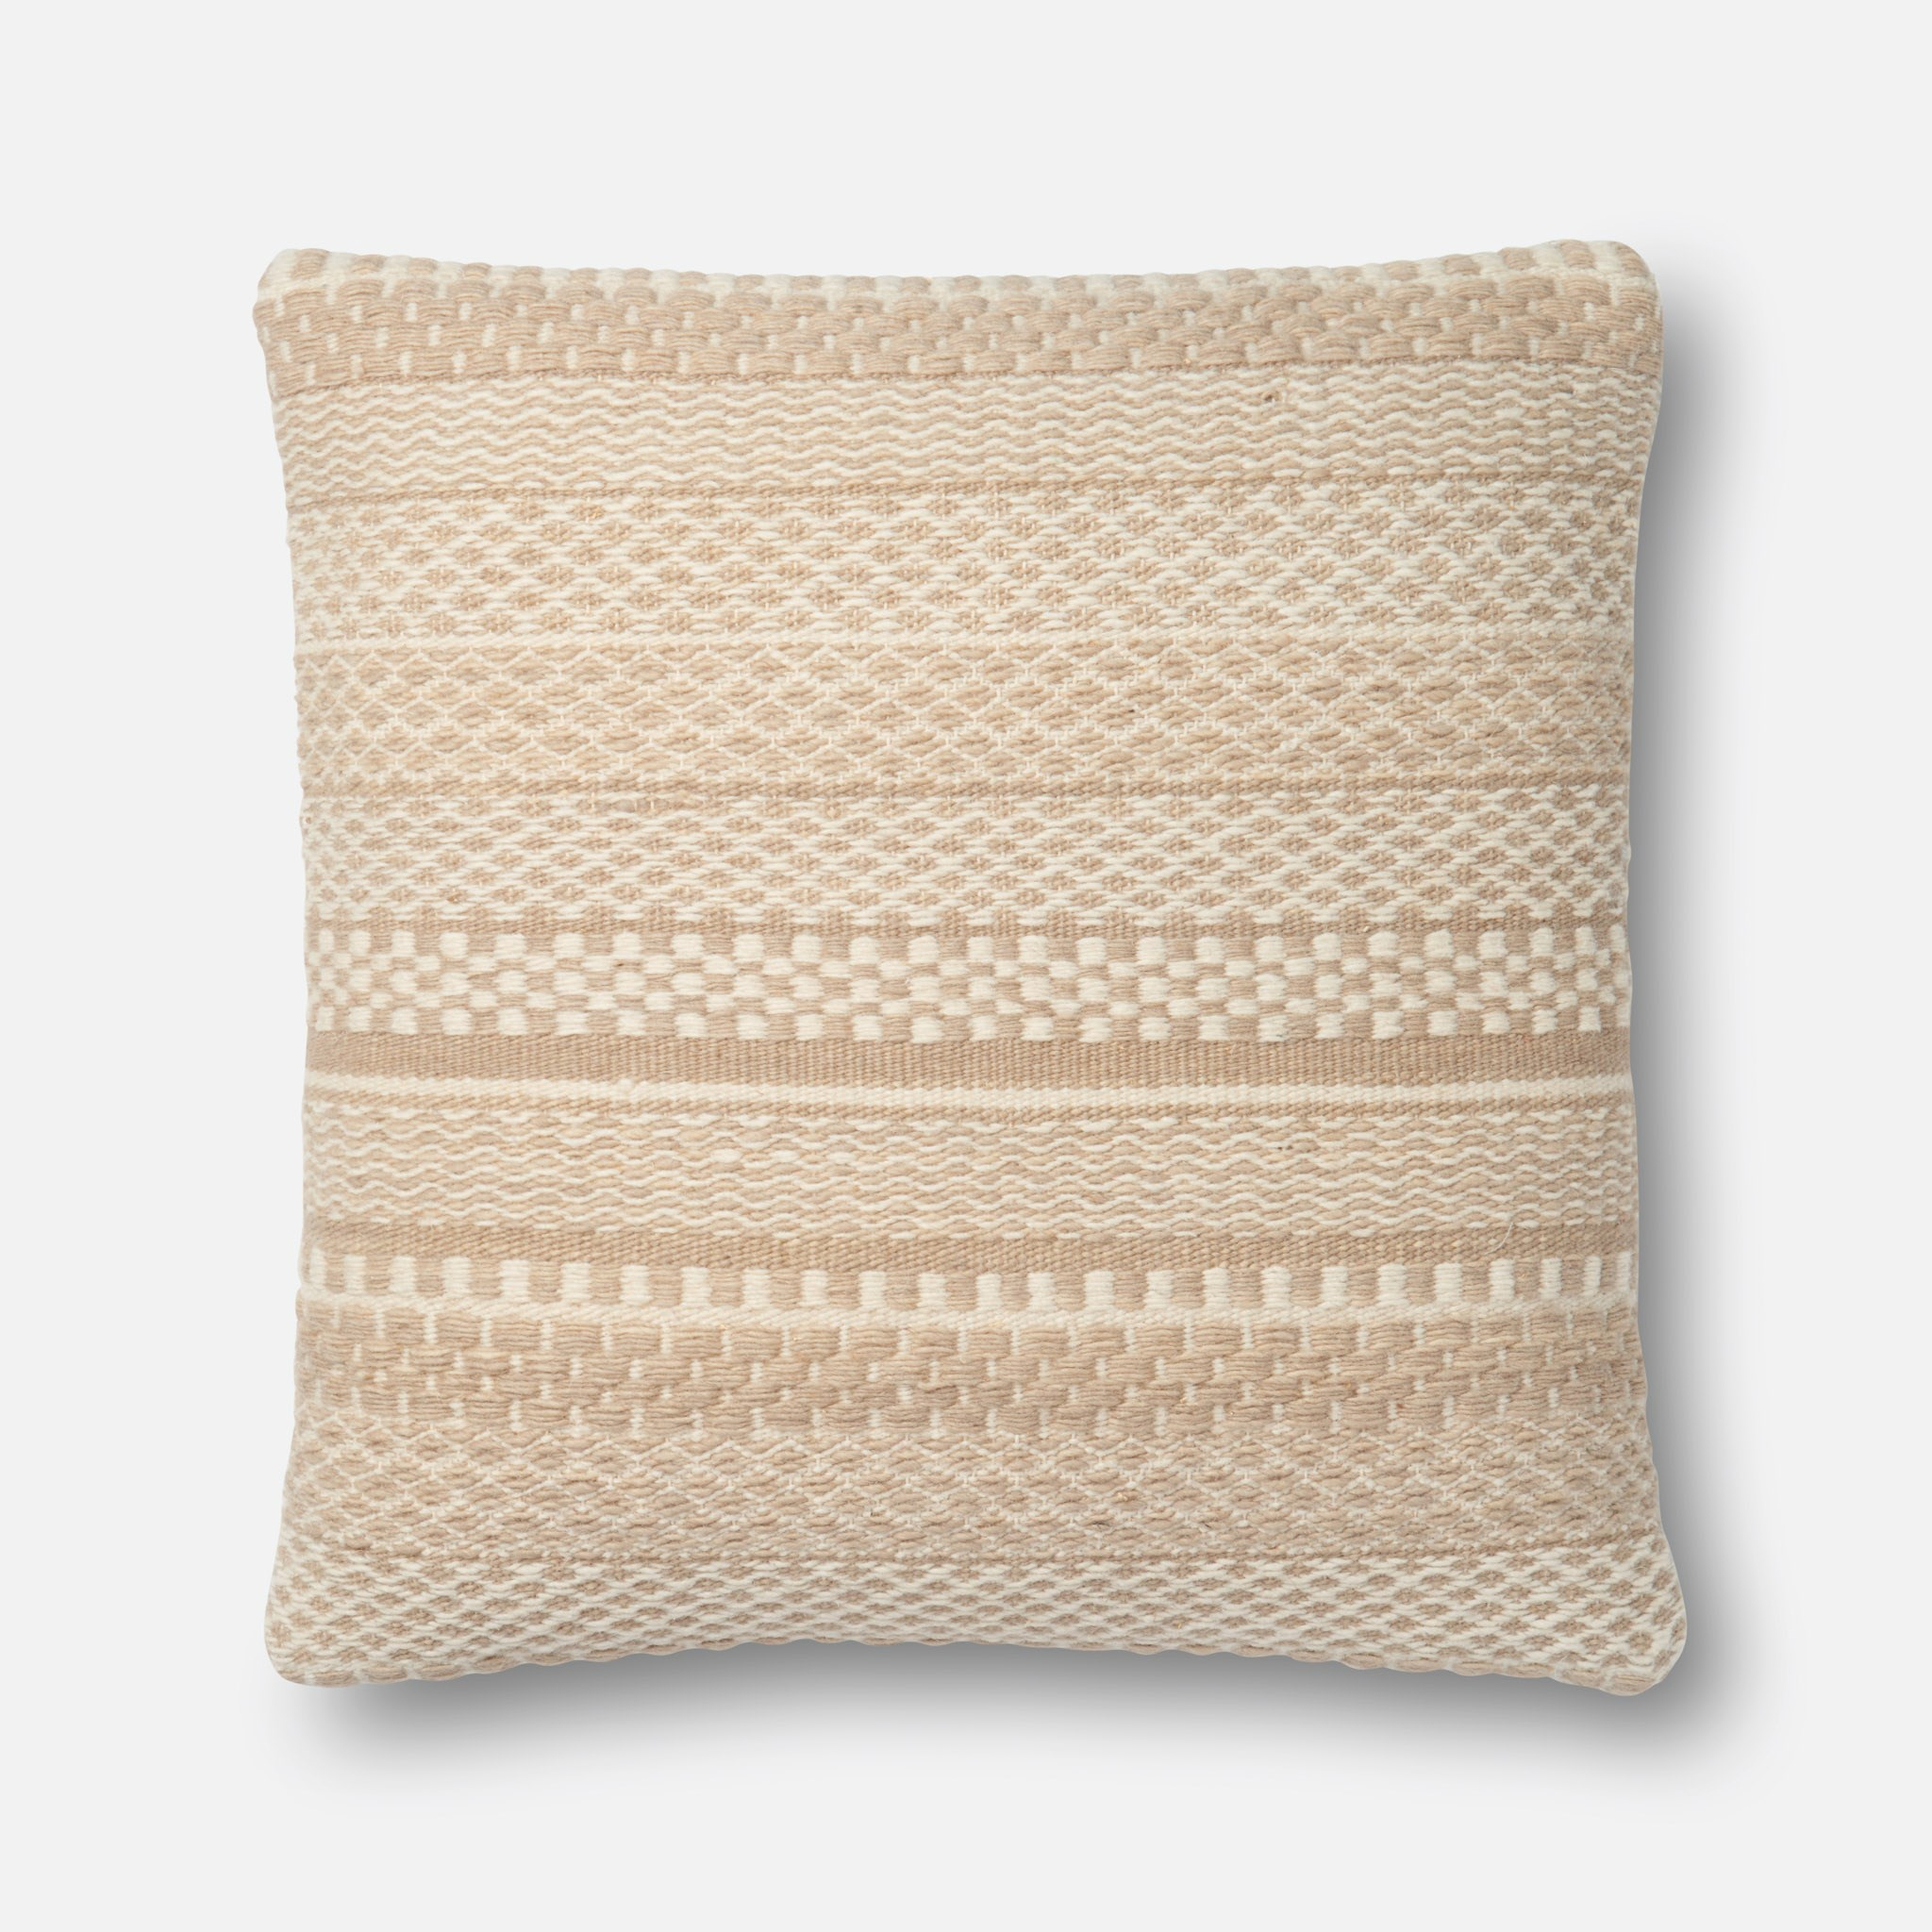 DSET Pillow STRAW 22" X 22" Cover w/Down - Magnolia Home by Joana Gaines Crafted by Loloi Rugs